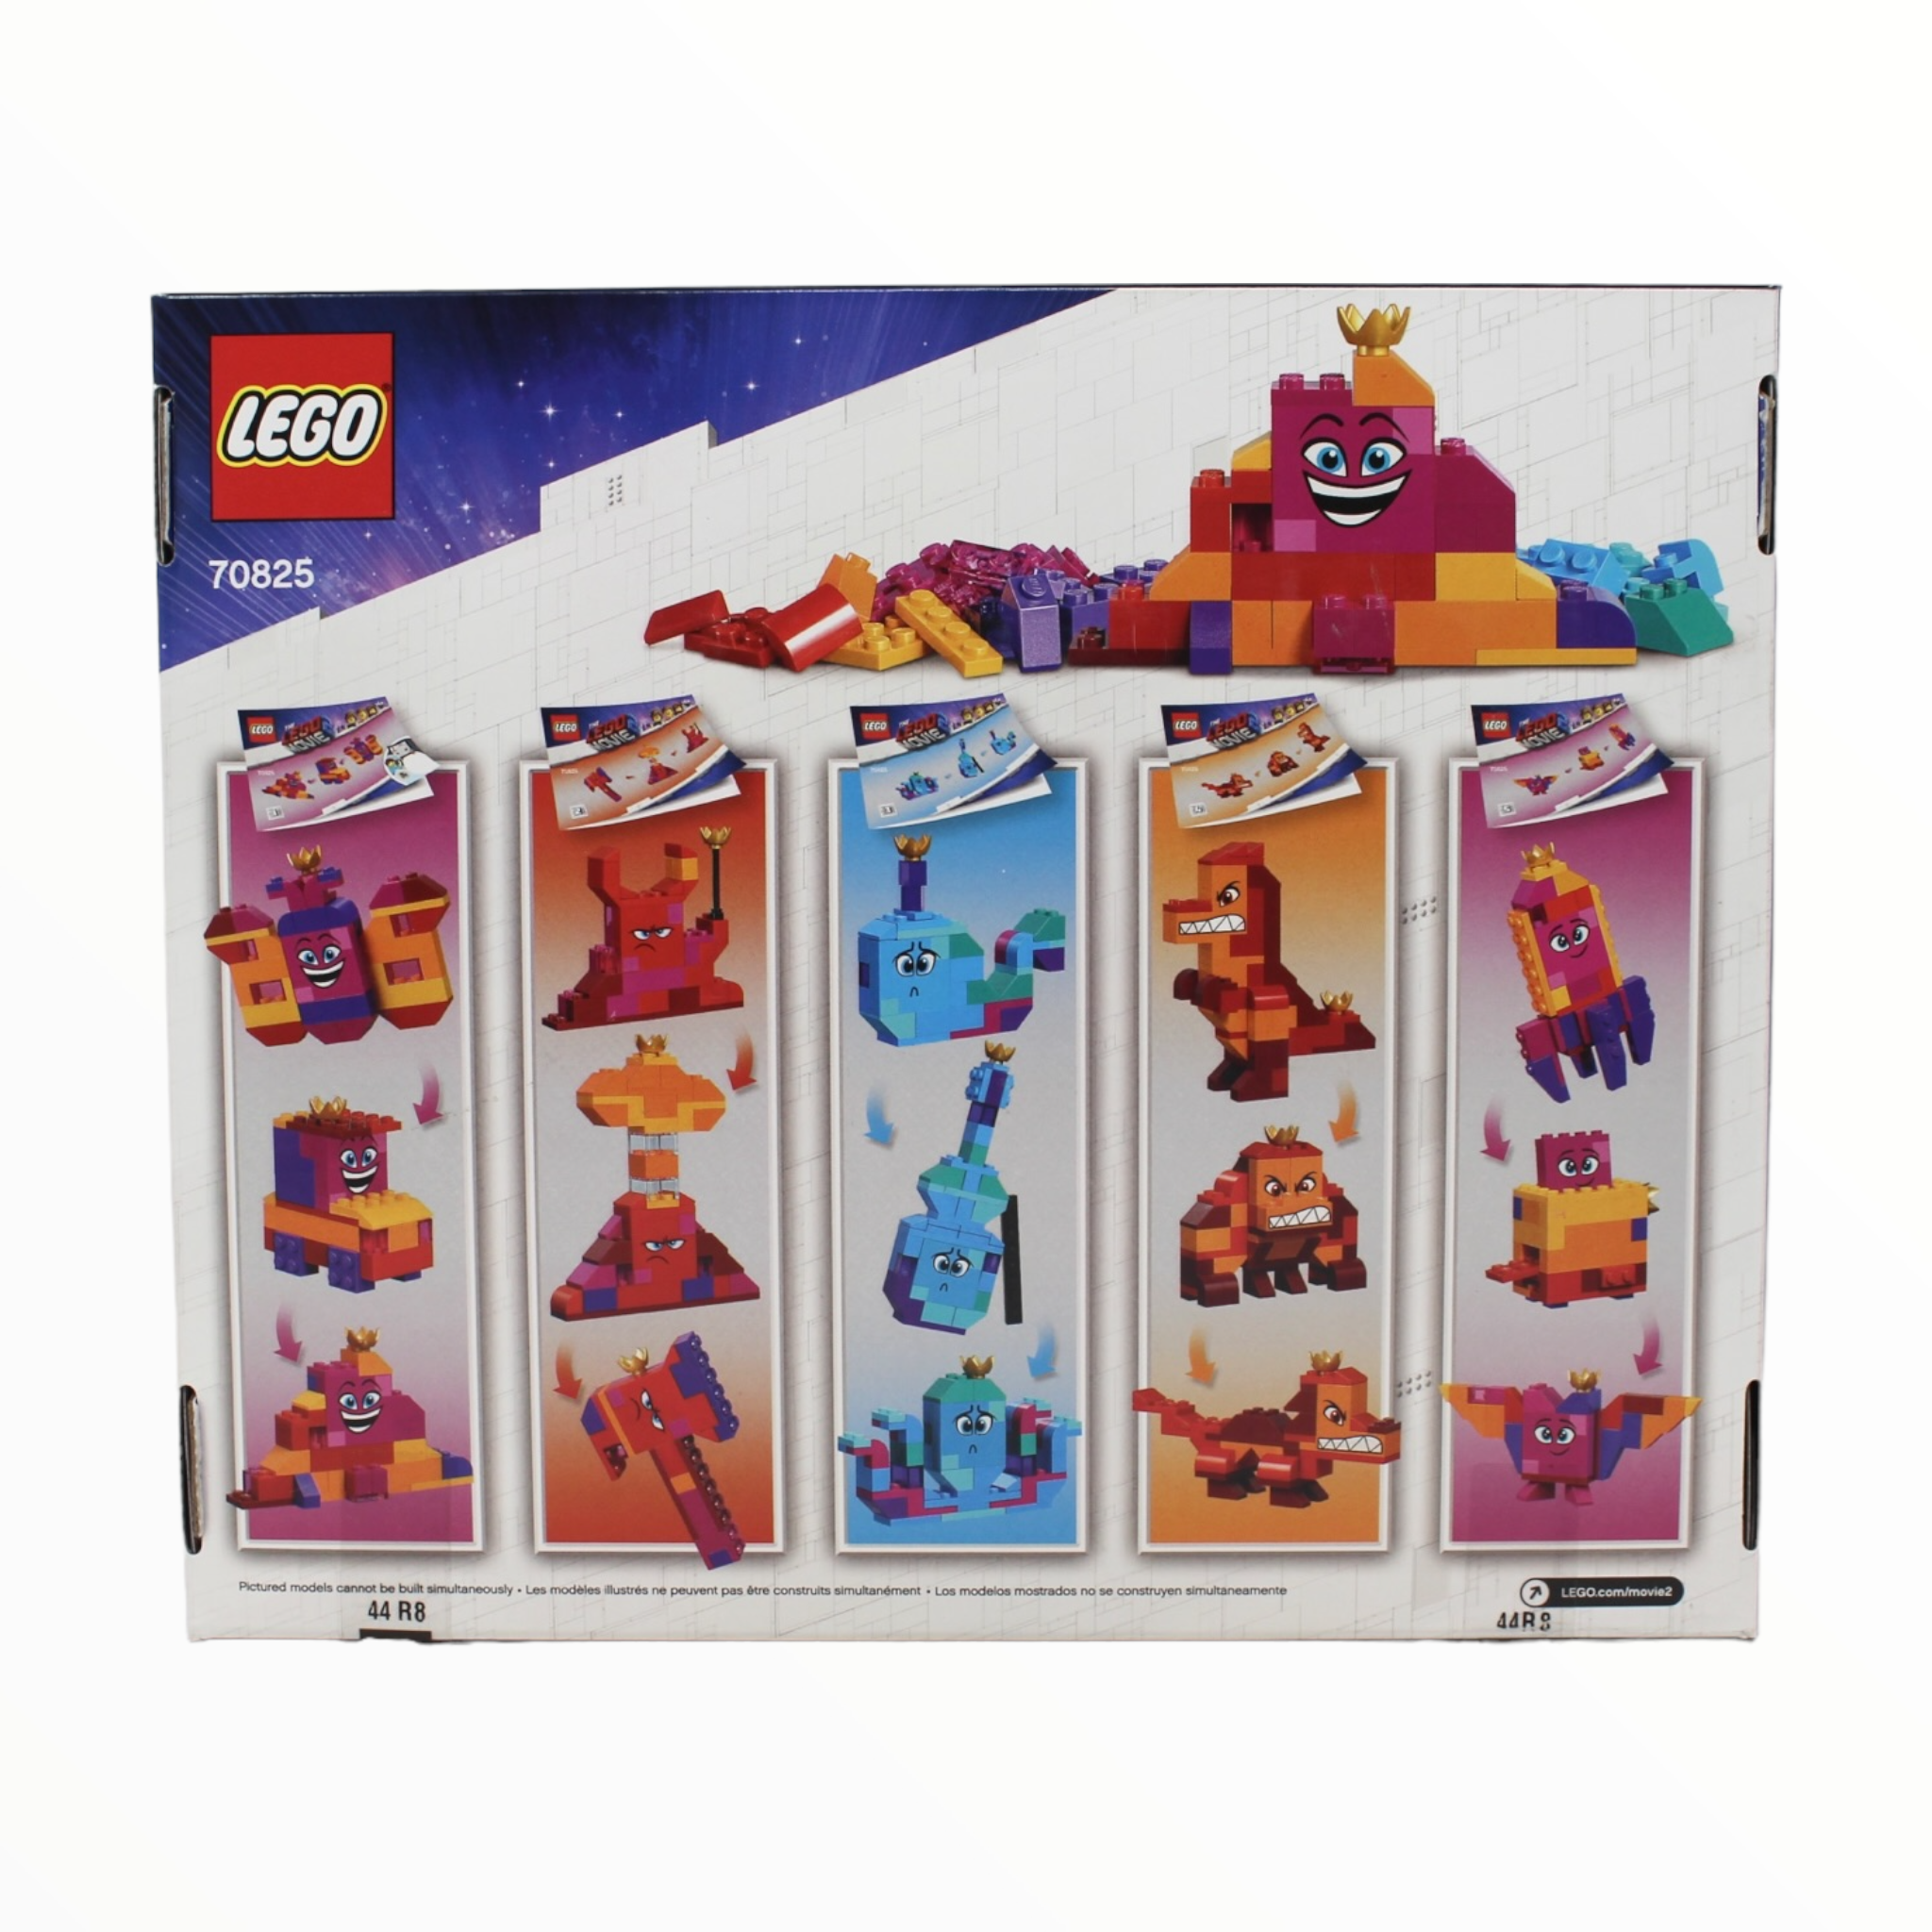 Retired Set 70825 The LEGO Movie 2 Queen Watevra’s Build Whatever Box!